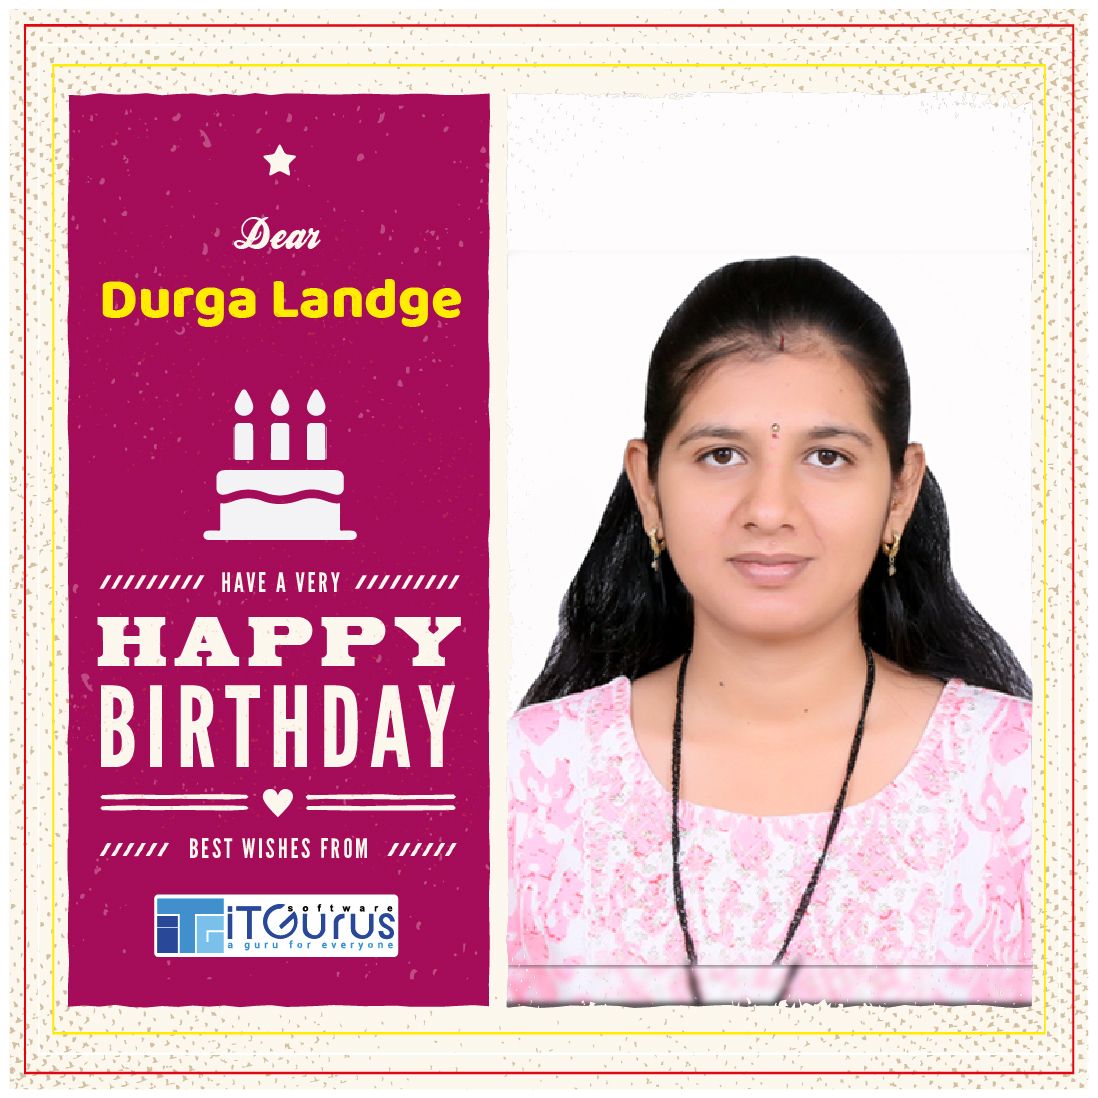 Sending you smiles for every moment of your special day!
Happy Birthday to @ Durga Landge from Team iT Gurus Software!

#birthday #birthdaycake #birthdayparty #birthdaycakes #birthdayballoons #birthdaydecoration #happybd #happybday #birthdayinoffice